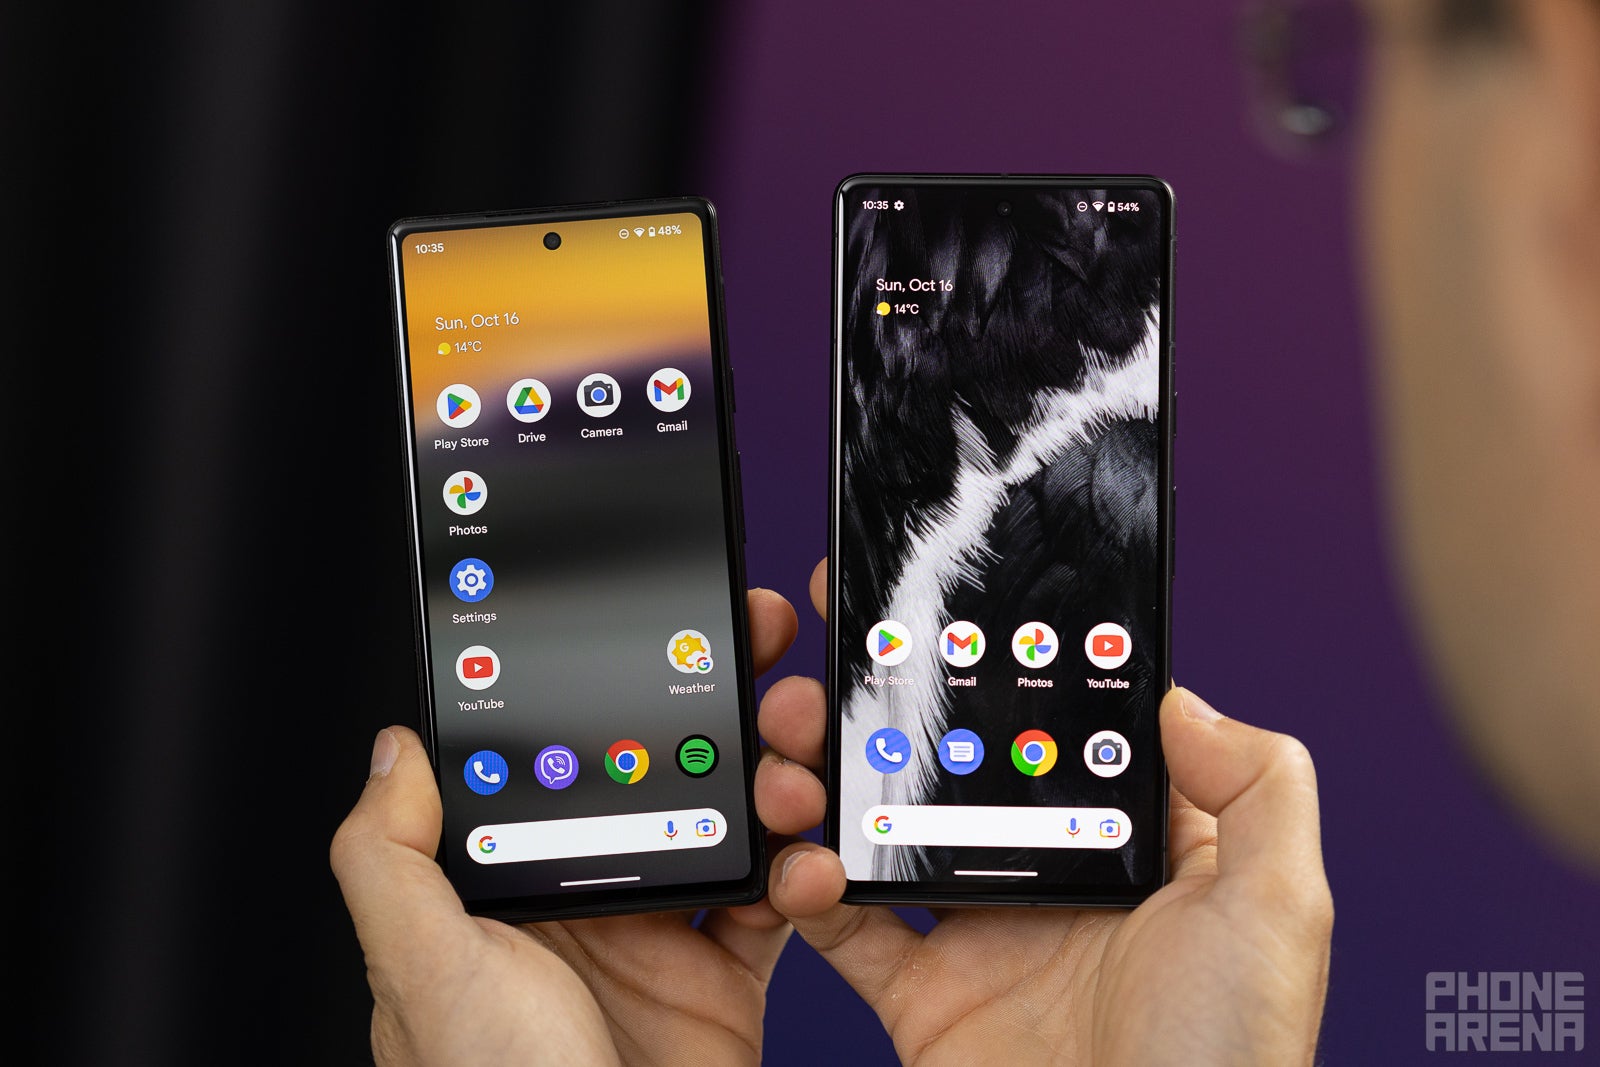 (Image Credit - PhoneArena) Pixel 6a is on the left, Pixel 7 - on the right - Google Pixel 6a vs Pixel 7: main differences